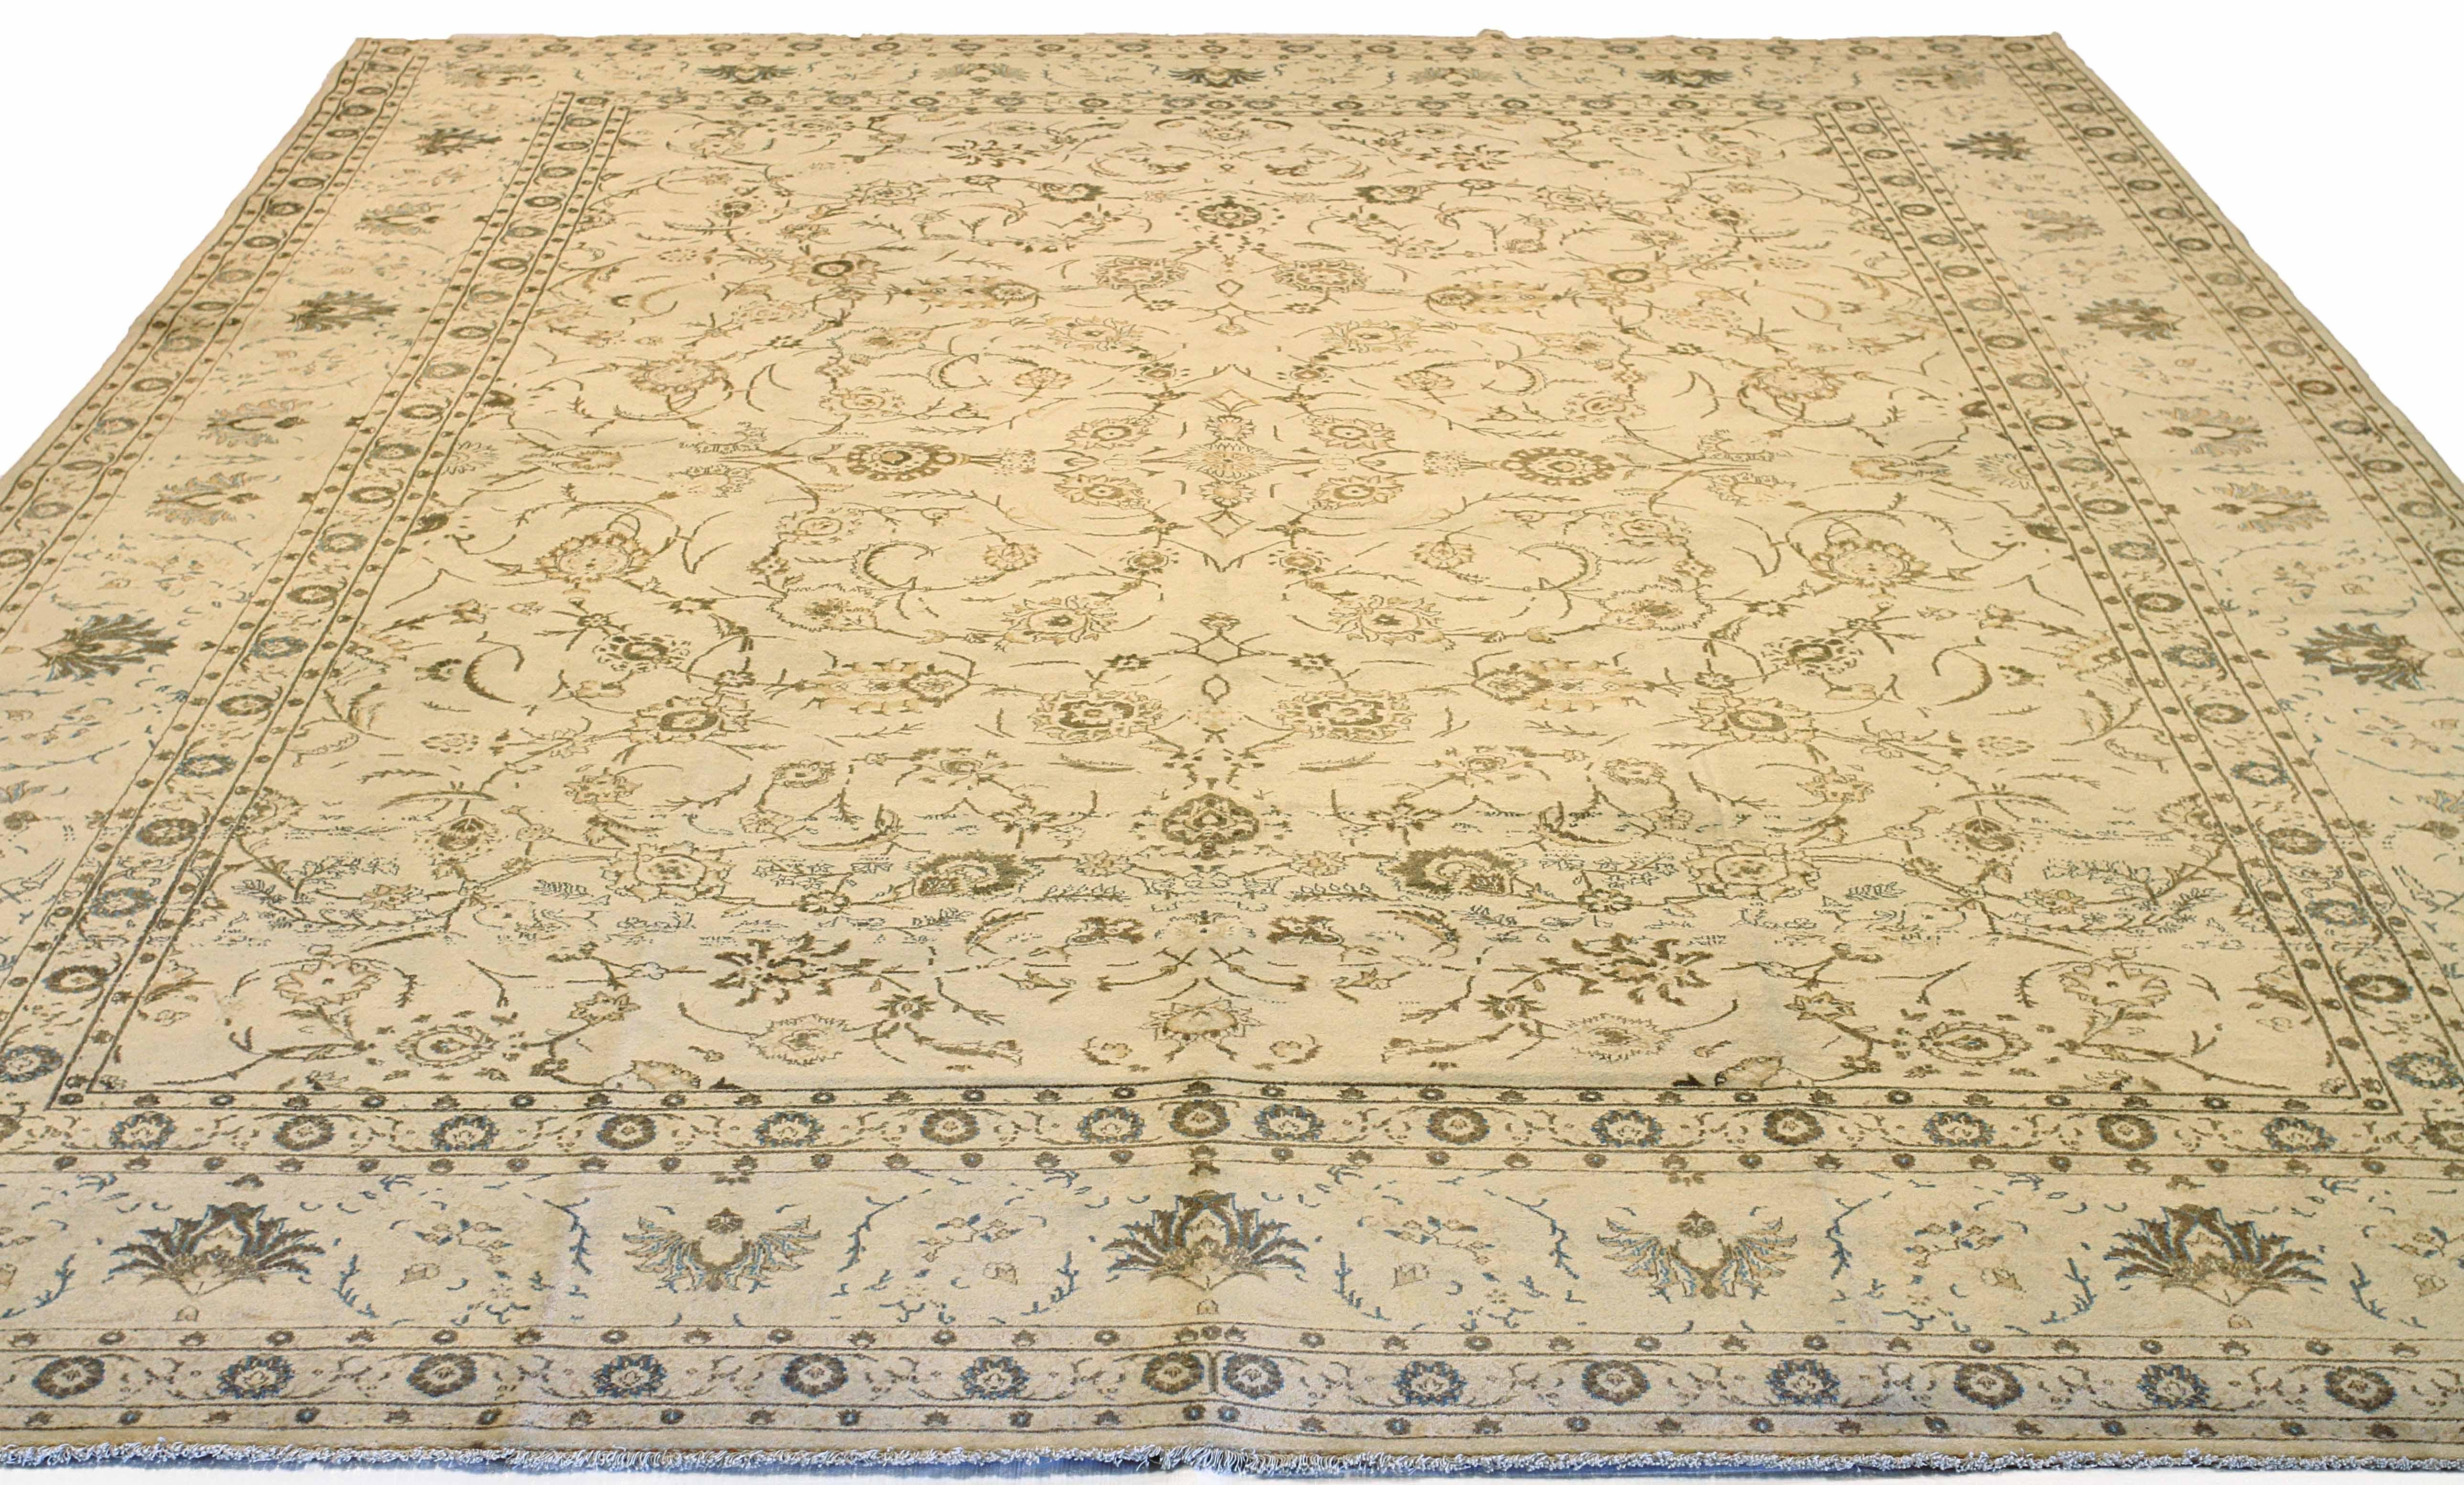 Bring an air of elegance and sophistication to your home with this exquisite Antique Persian Kashan rug. Handwoven from the finest sheep’s wool, it features rich, vibrant colors that are achieved using all-natural vegetable dyes, making it safe for